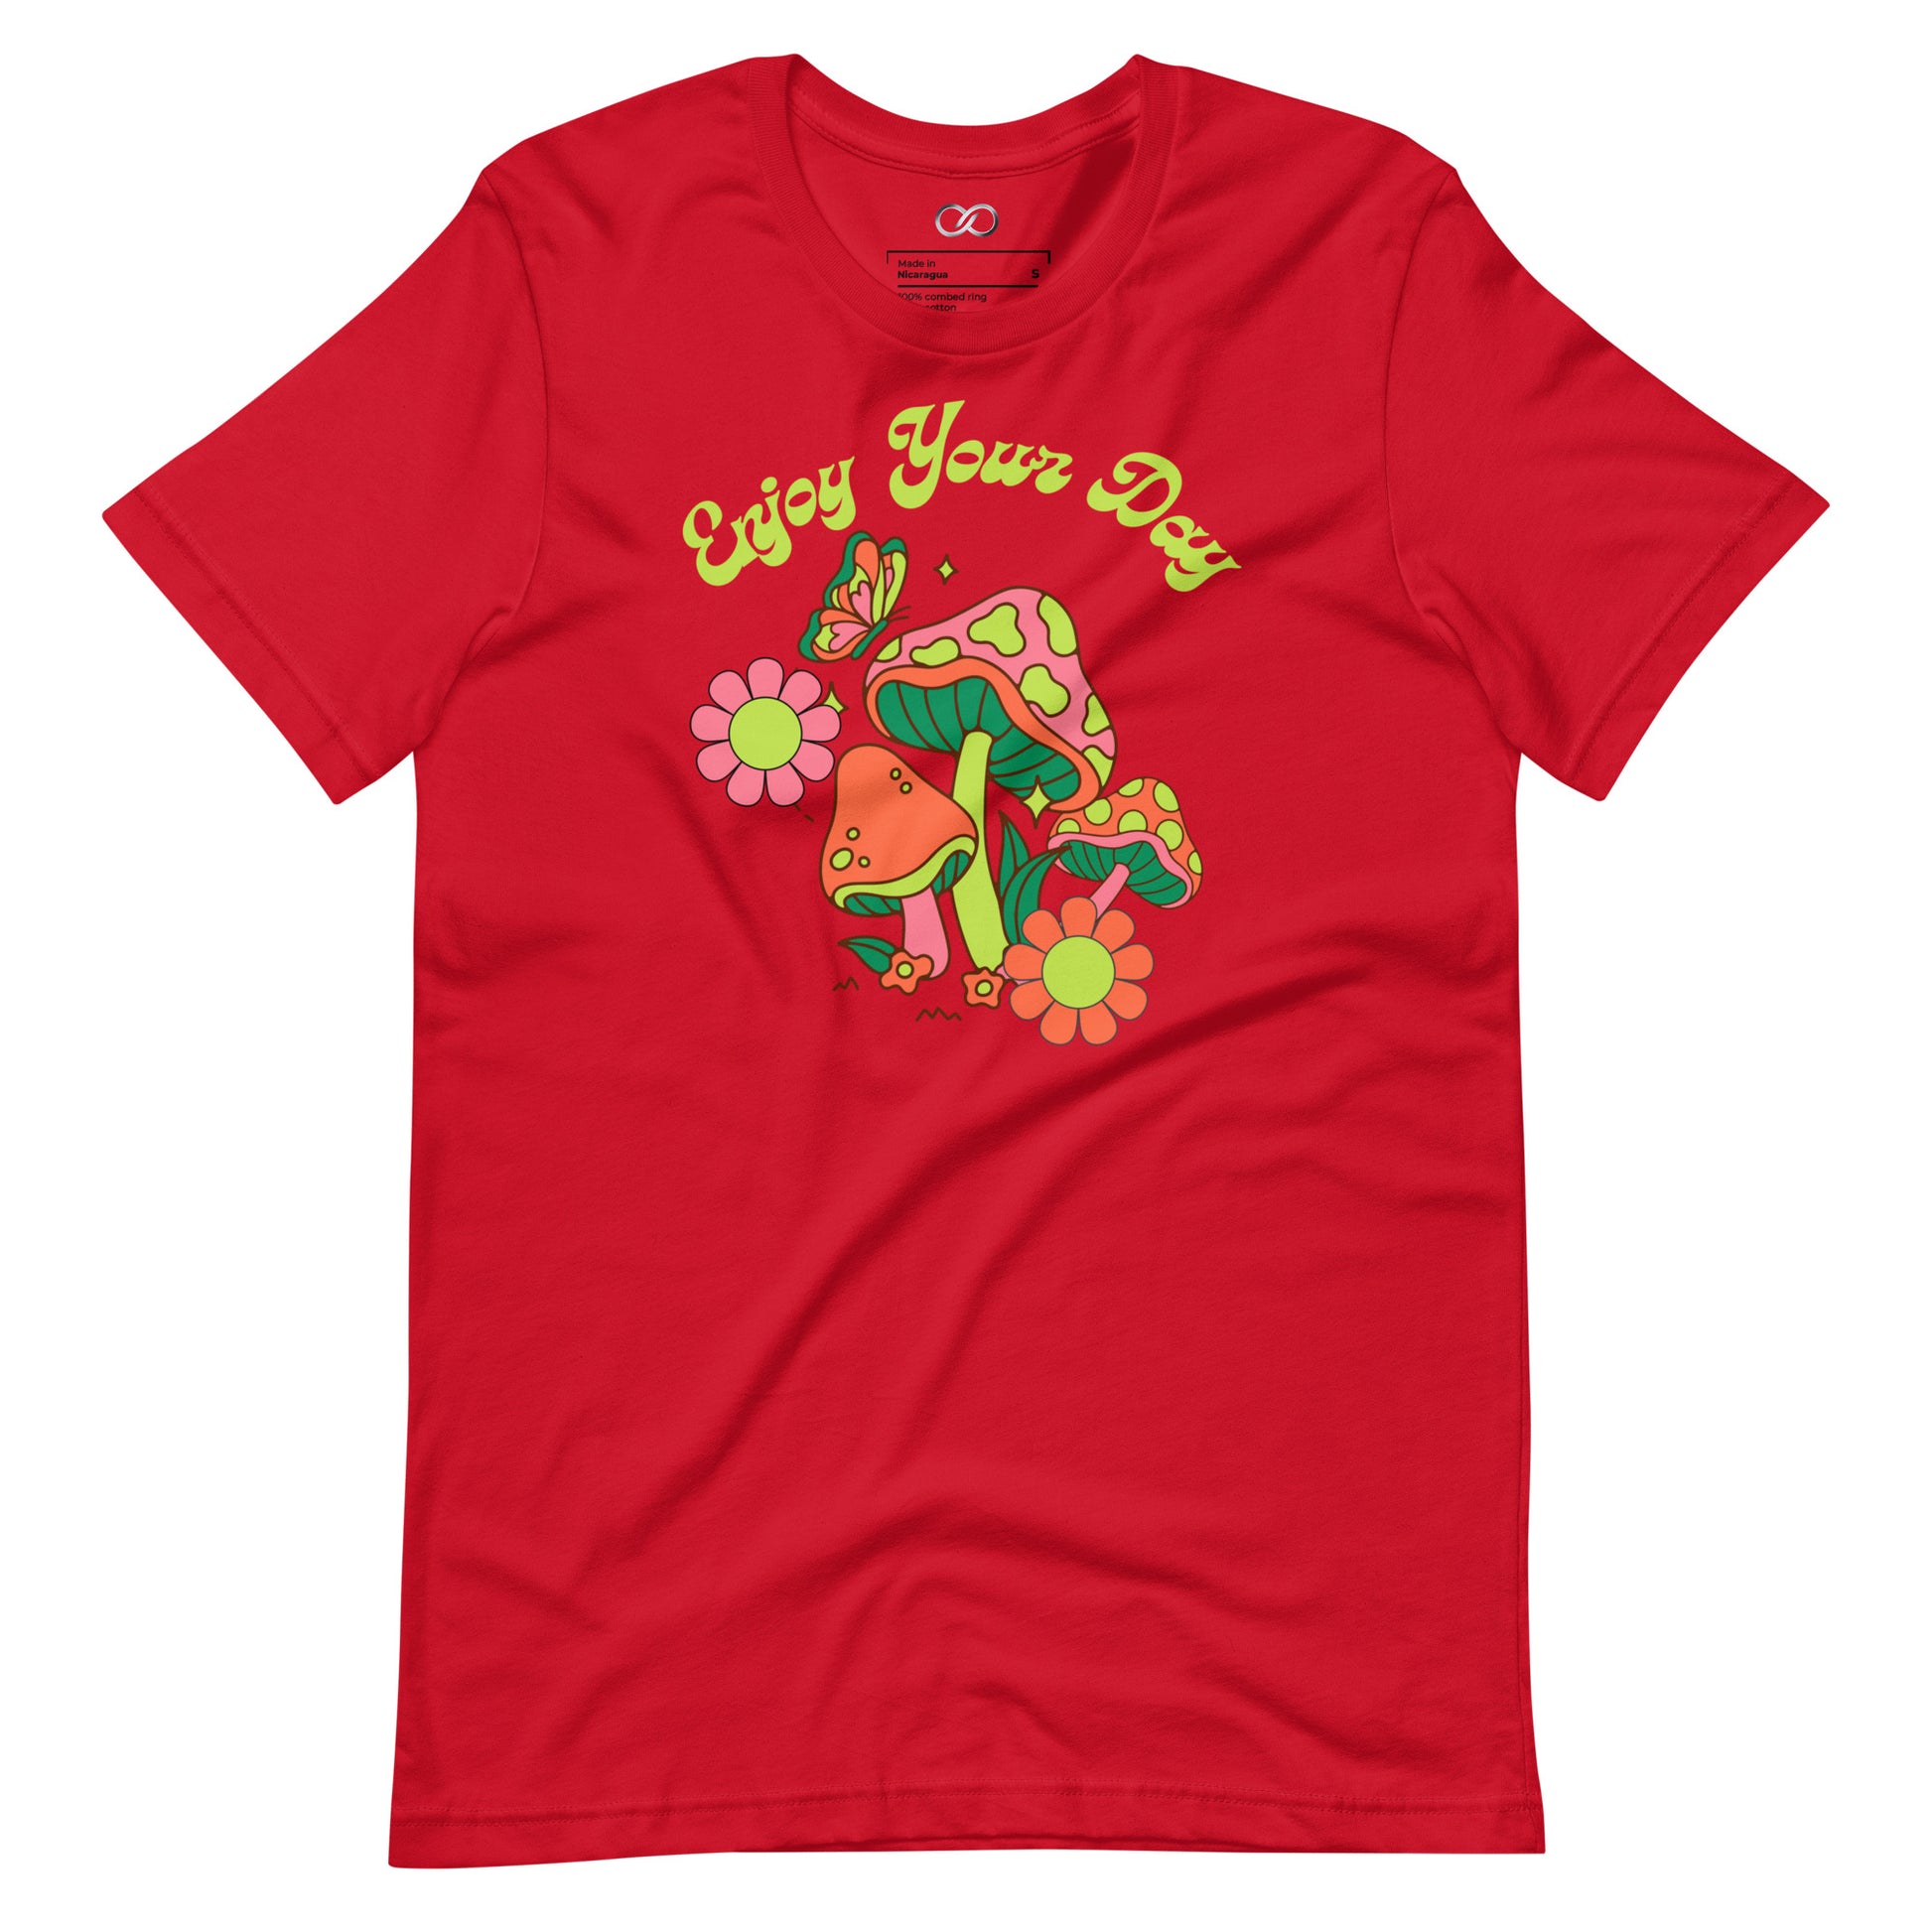 A red short sleeve shirt featuring a colorful 'Enjoy Your Day' mushroom design, combining comfort with a cheerful saying.